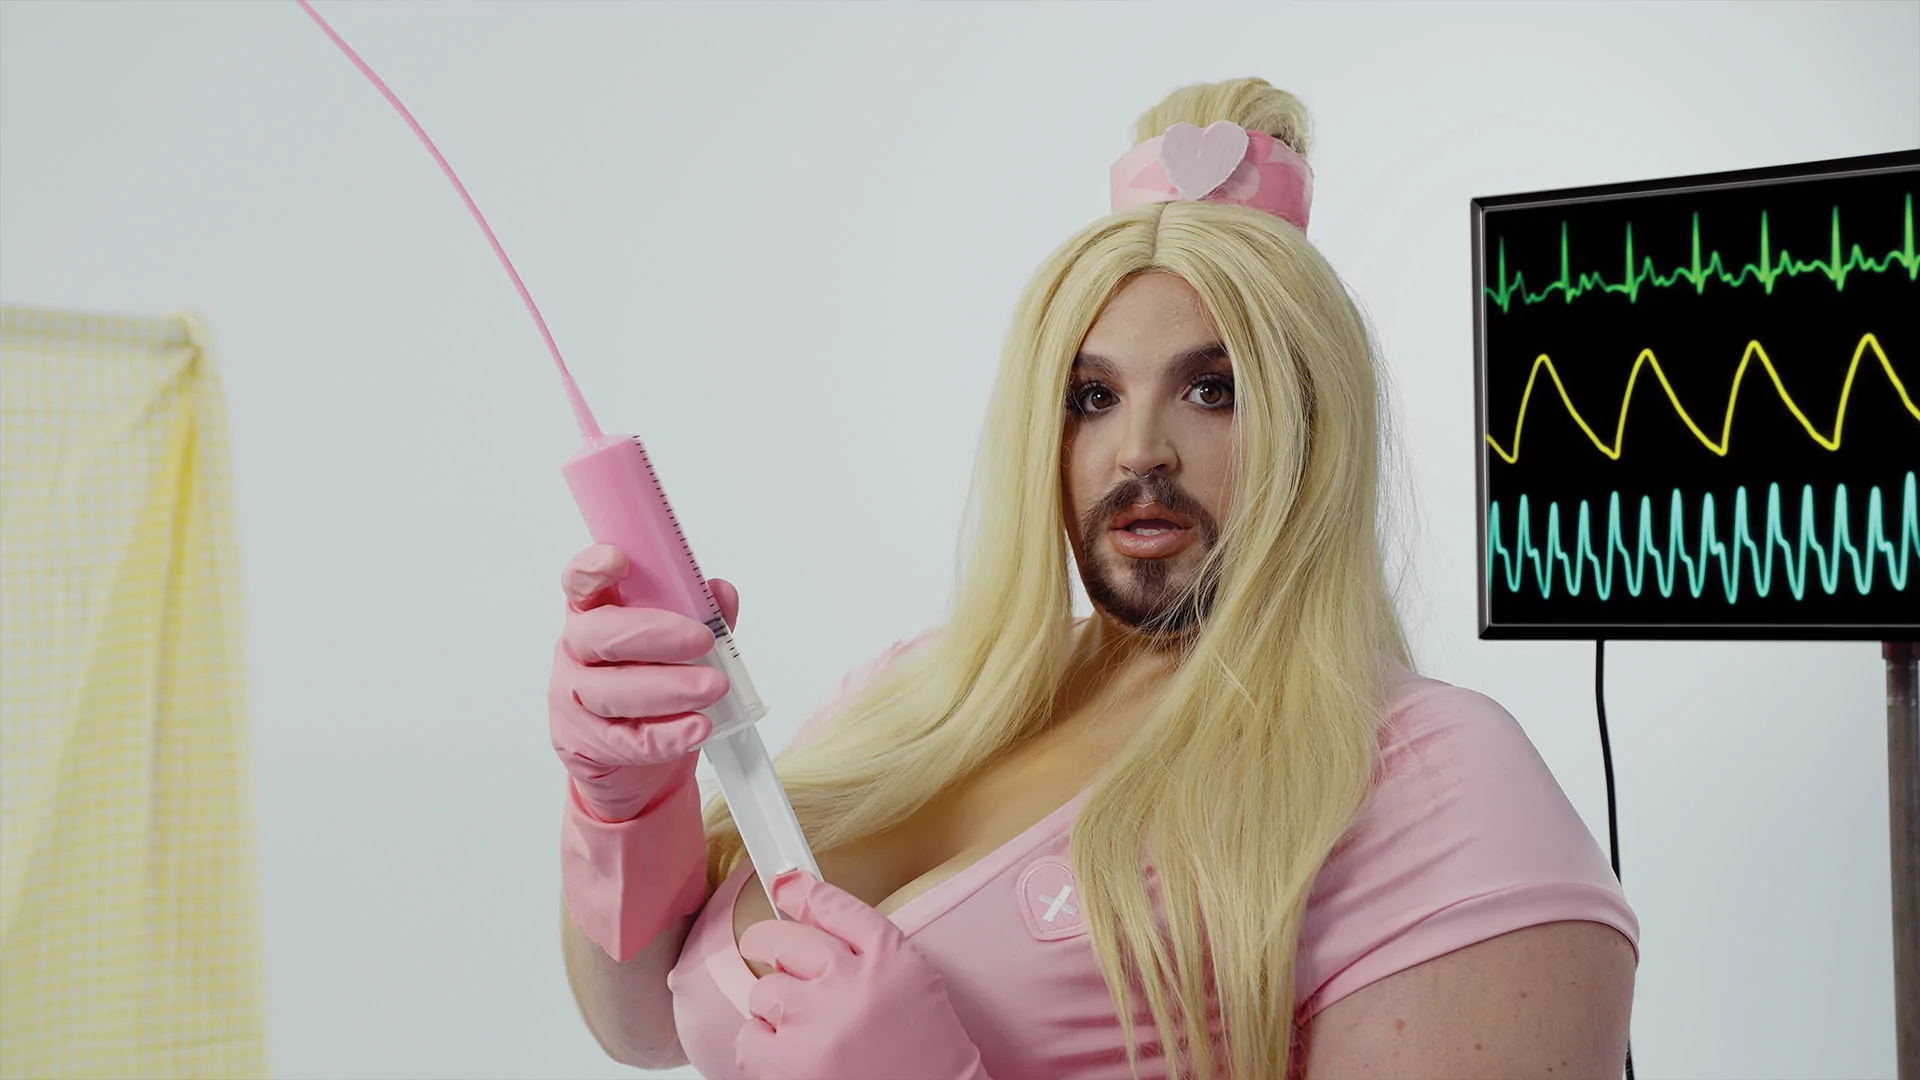 A still from Wreckno's EZ music video. They're dressed as a nurse in a pink costume holding a toy pink syringe